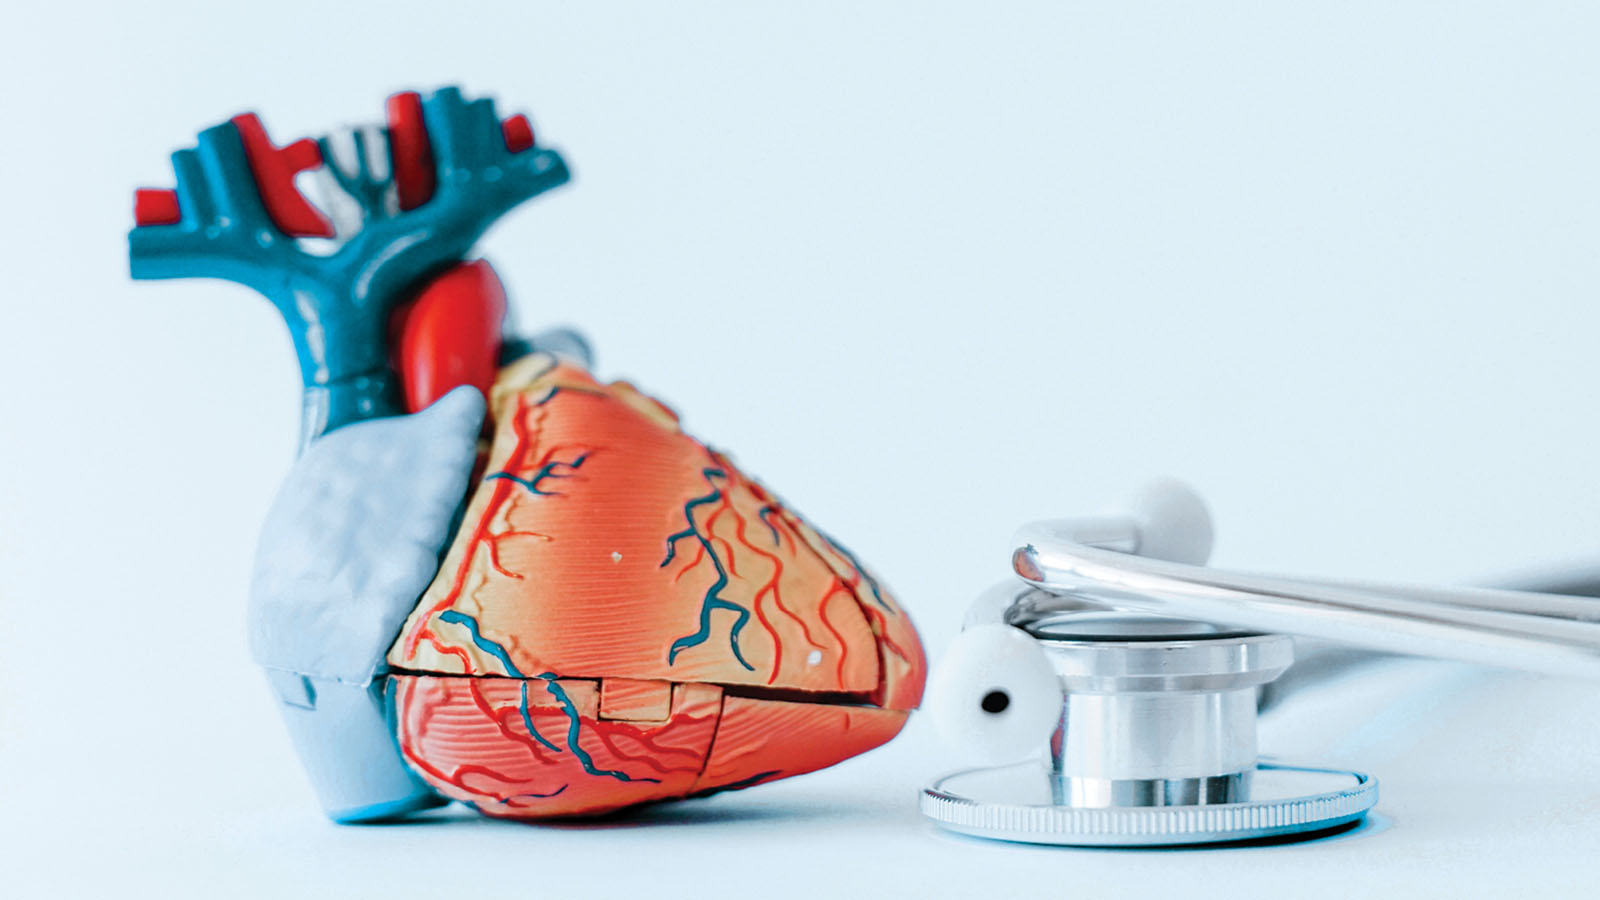 Stock image of a plastic model of a human heart, and a stethoscope.